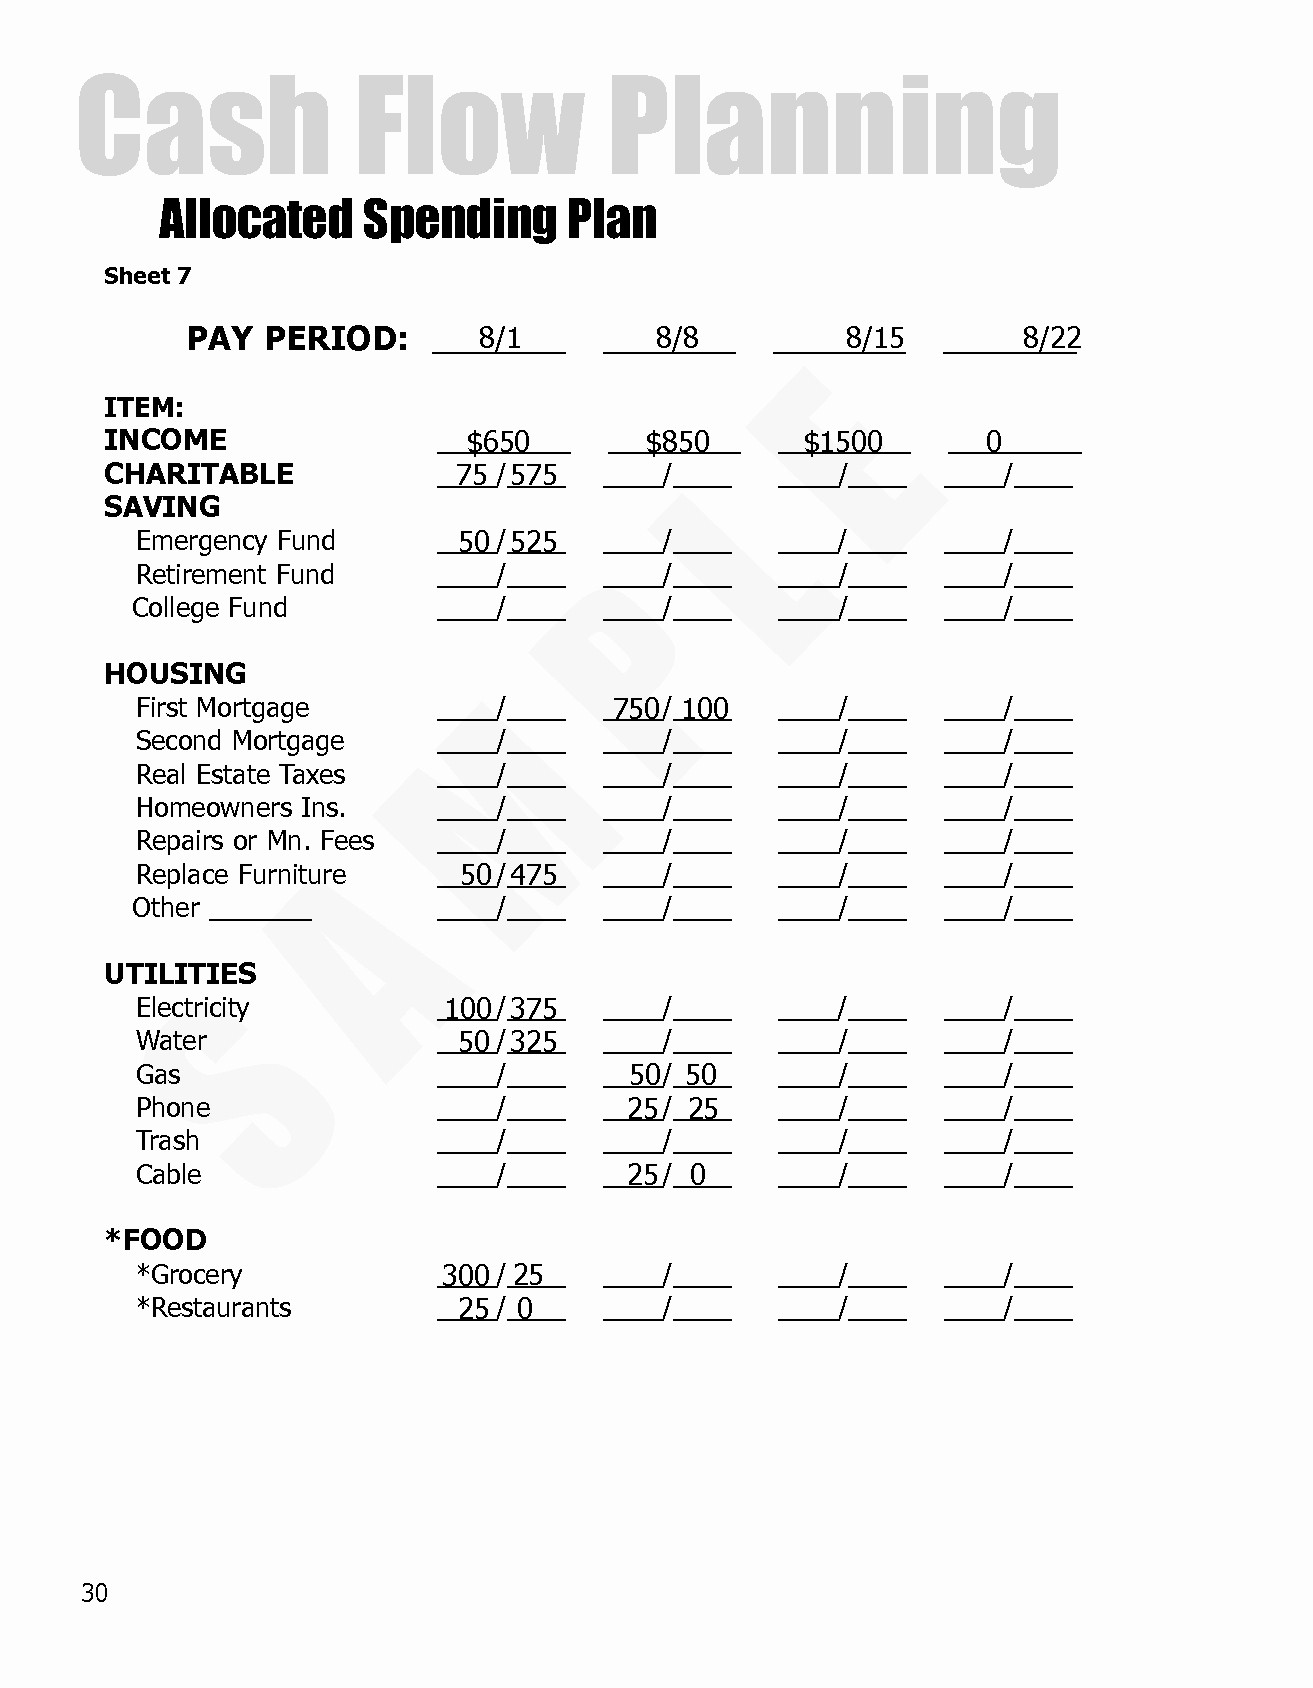 Dave Ramsey Allocated Spending Plan Excel Spreadsheet New How To Use